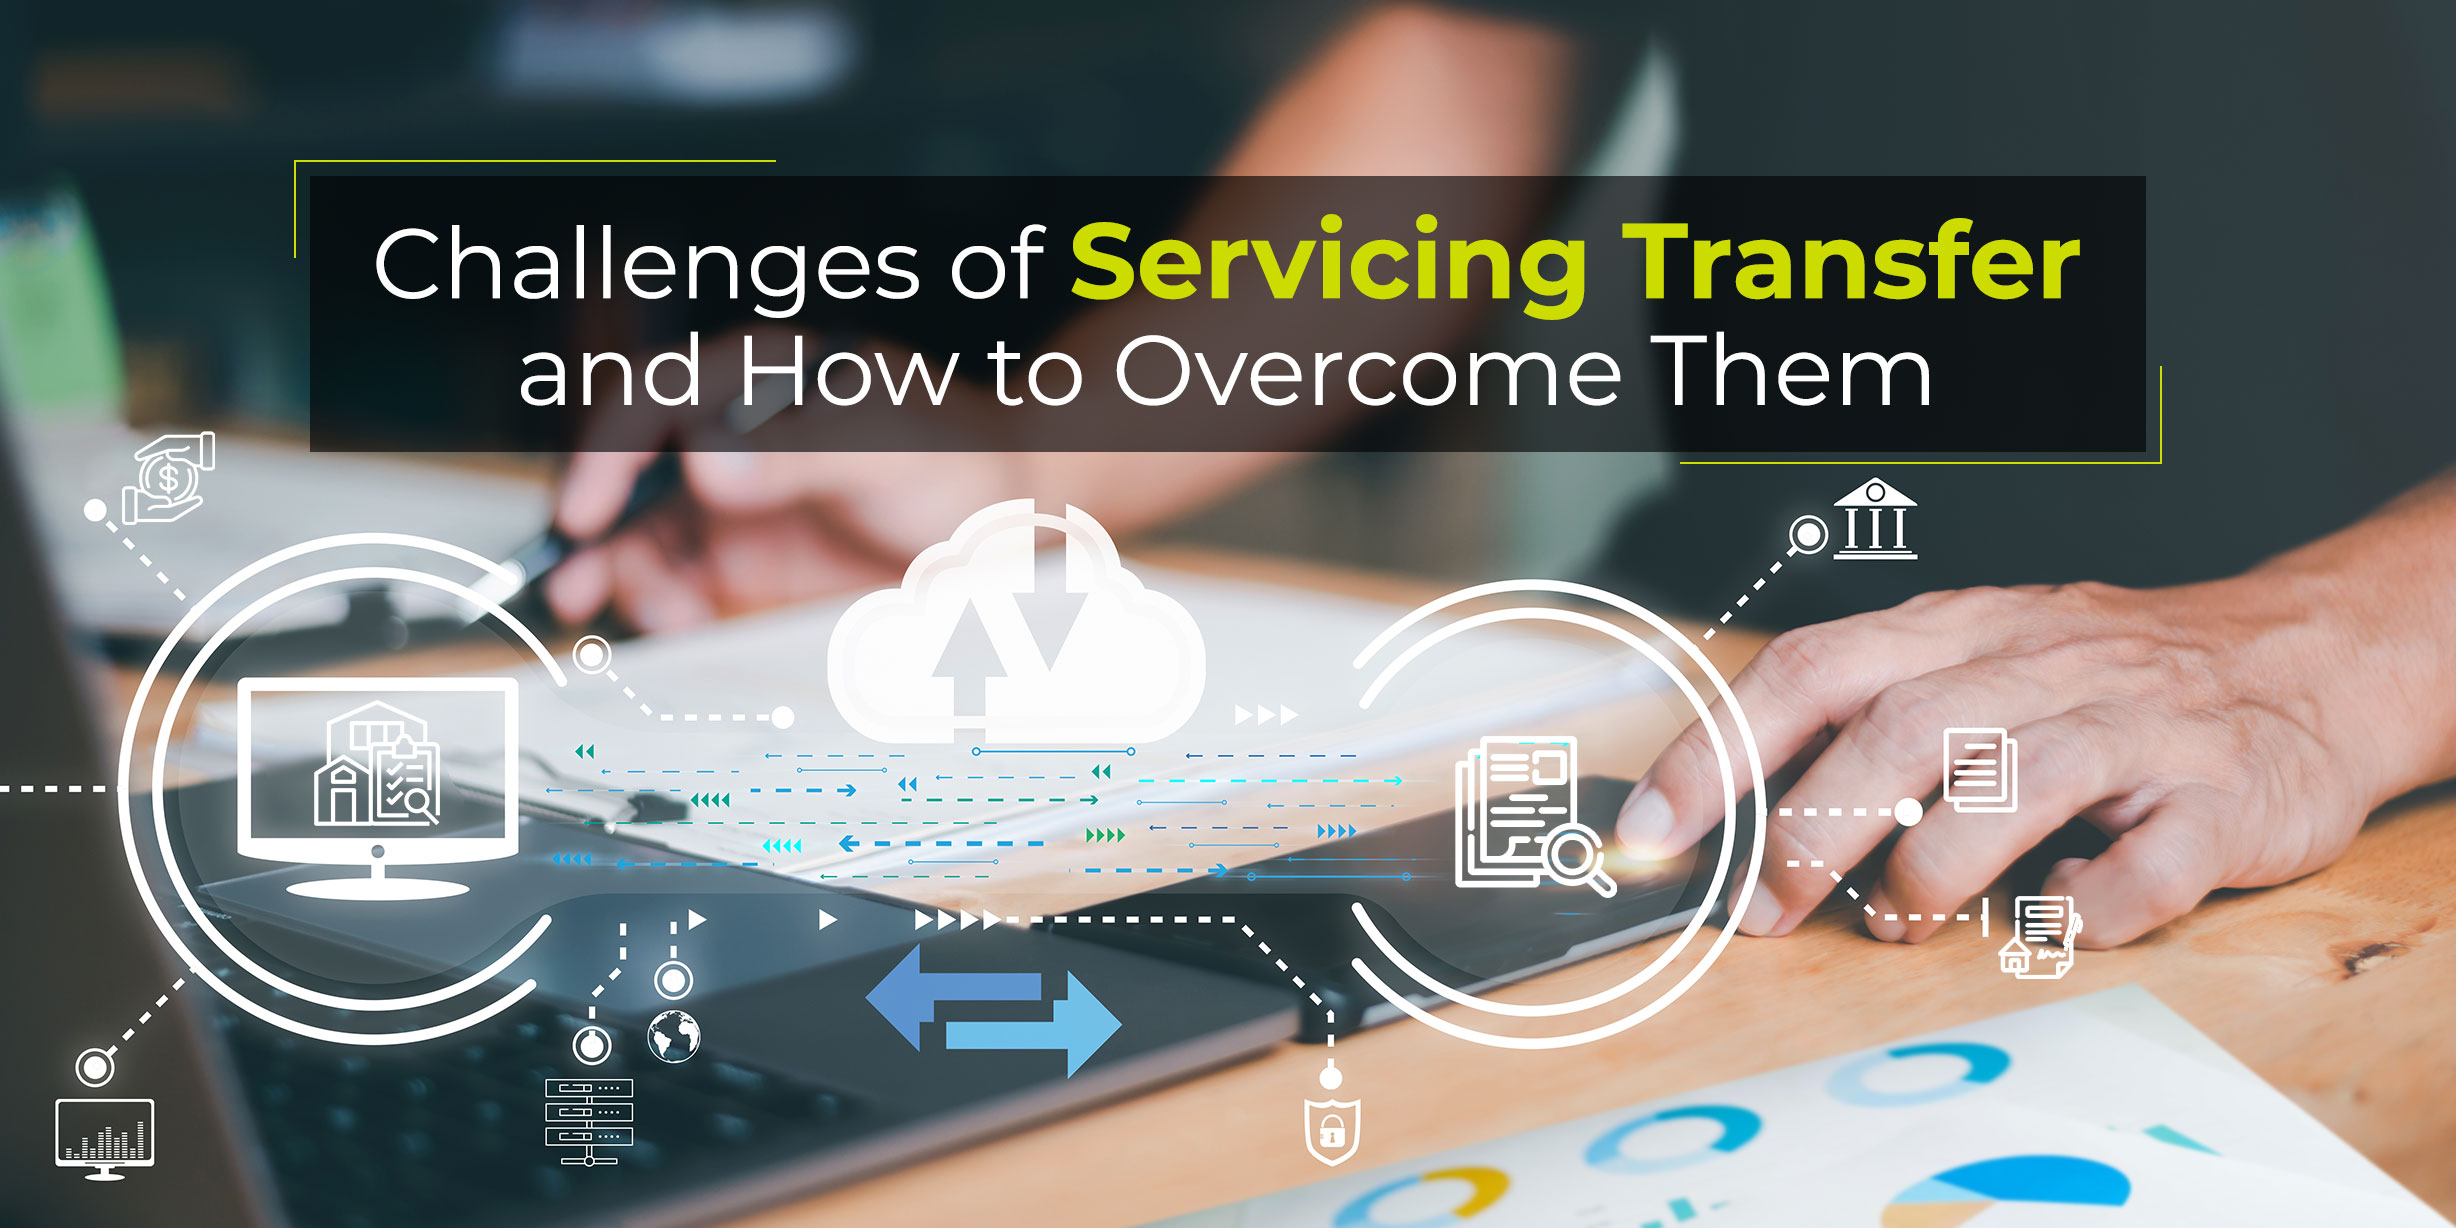 What Are the Challenges of Servicing Transfer?